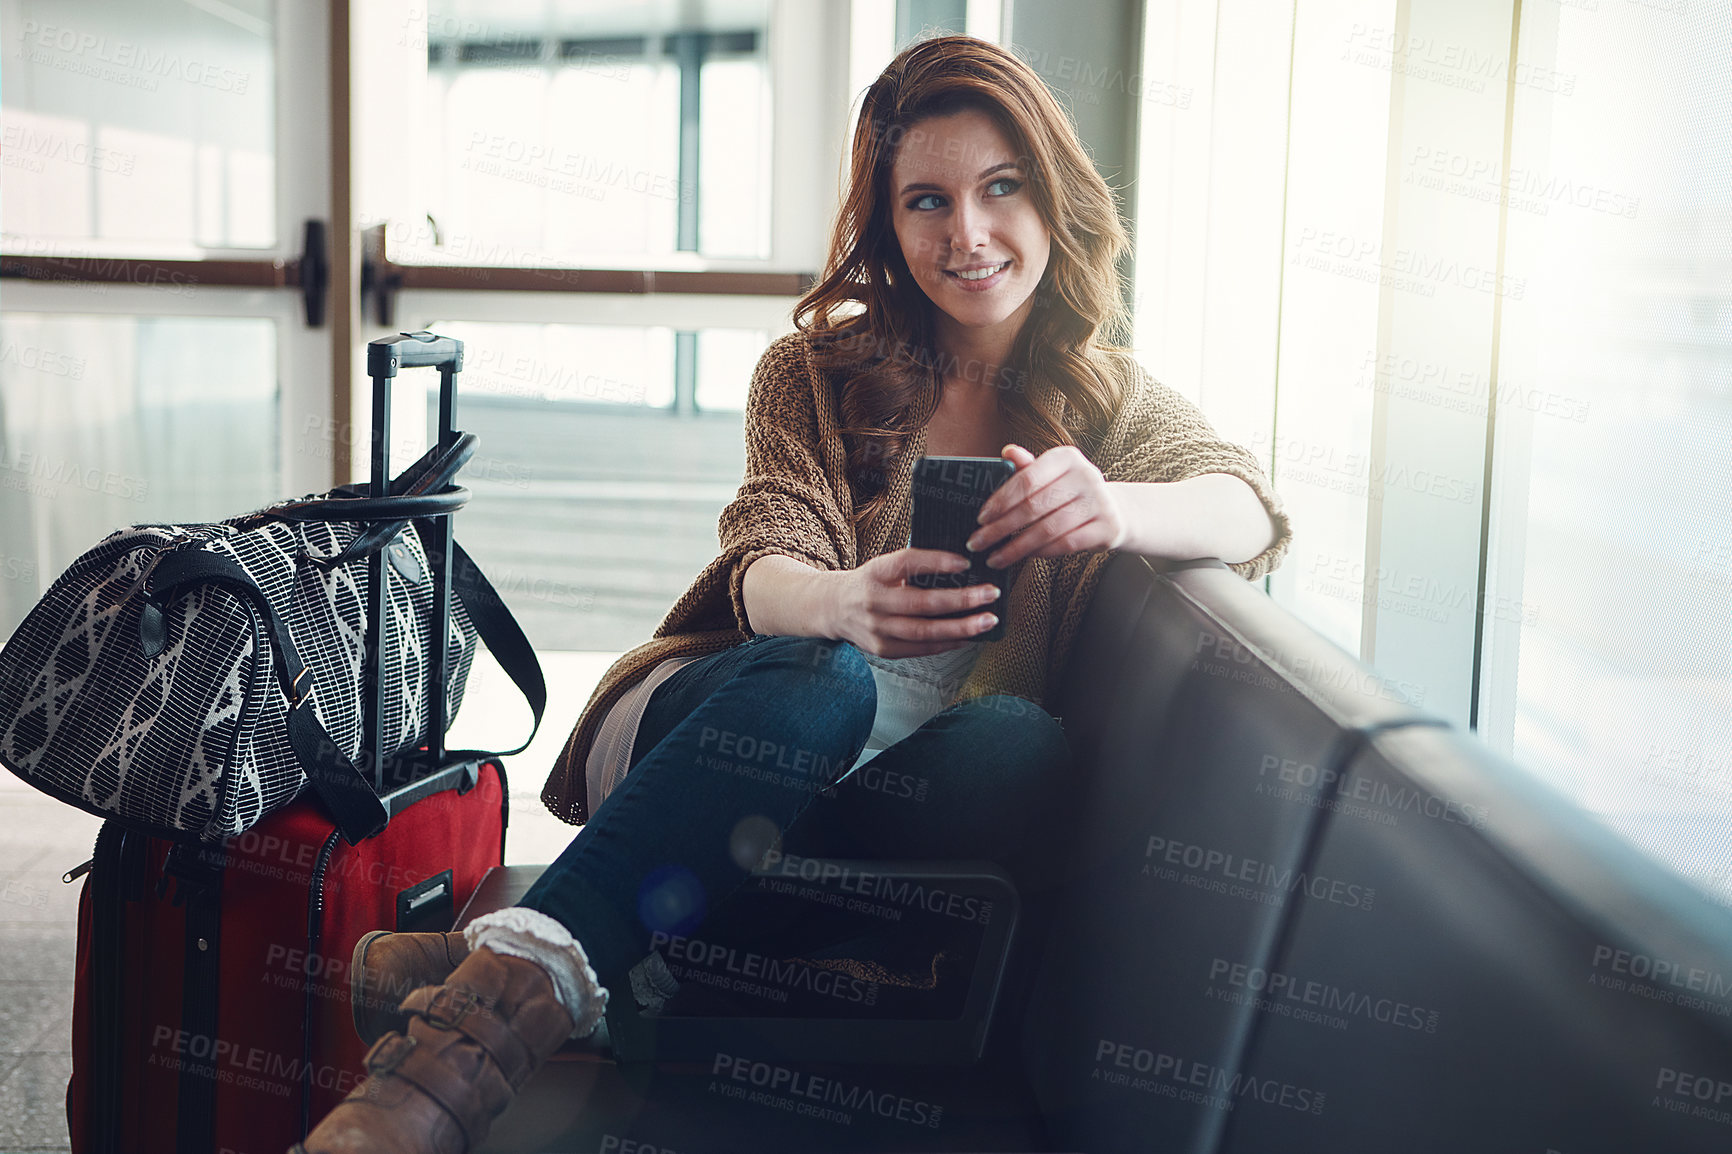 Buy stock photo Shot of a young woman sitting in an airport with her luggage and holding her cellphone while looking outside